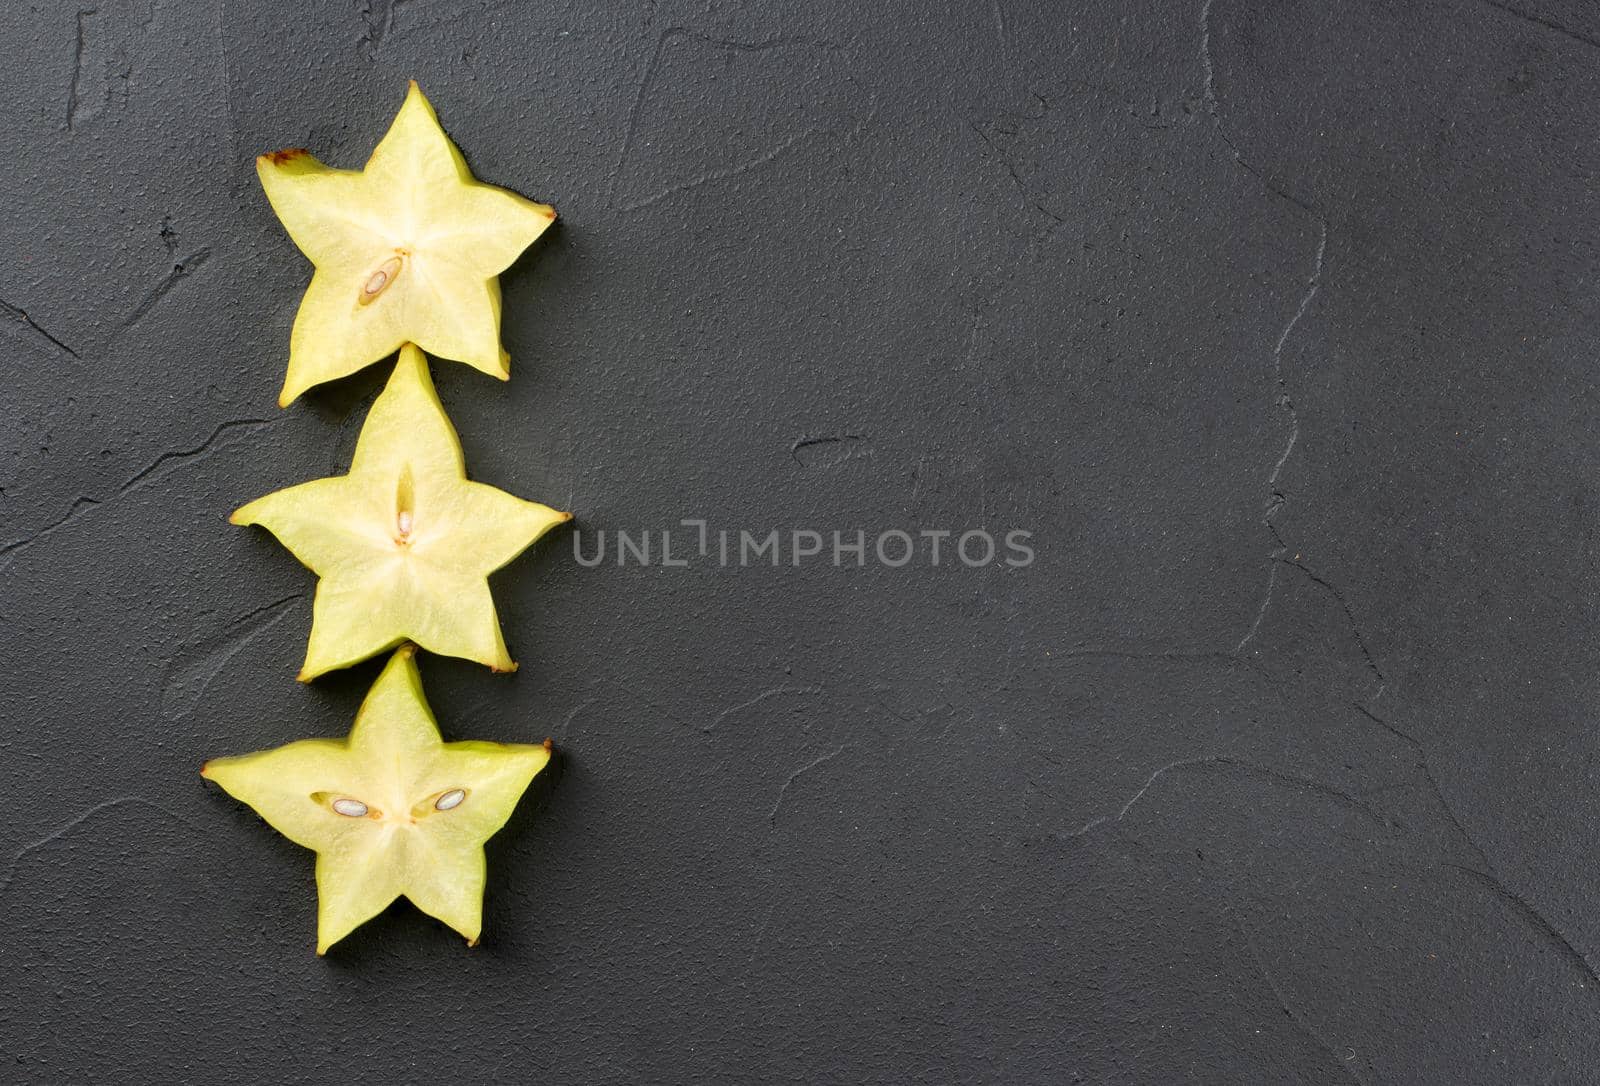 Three juicy slices of carambola fruit on a dark background, top view